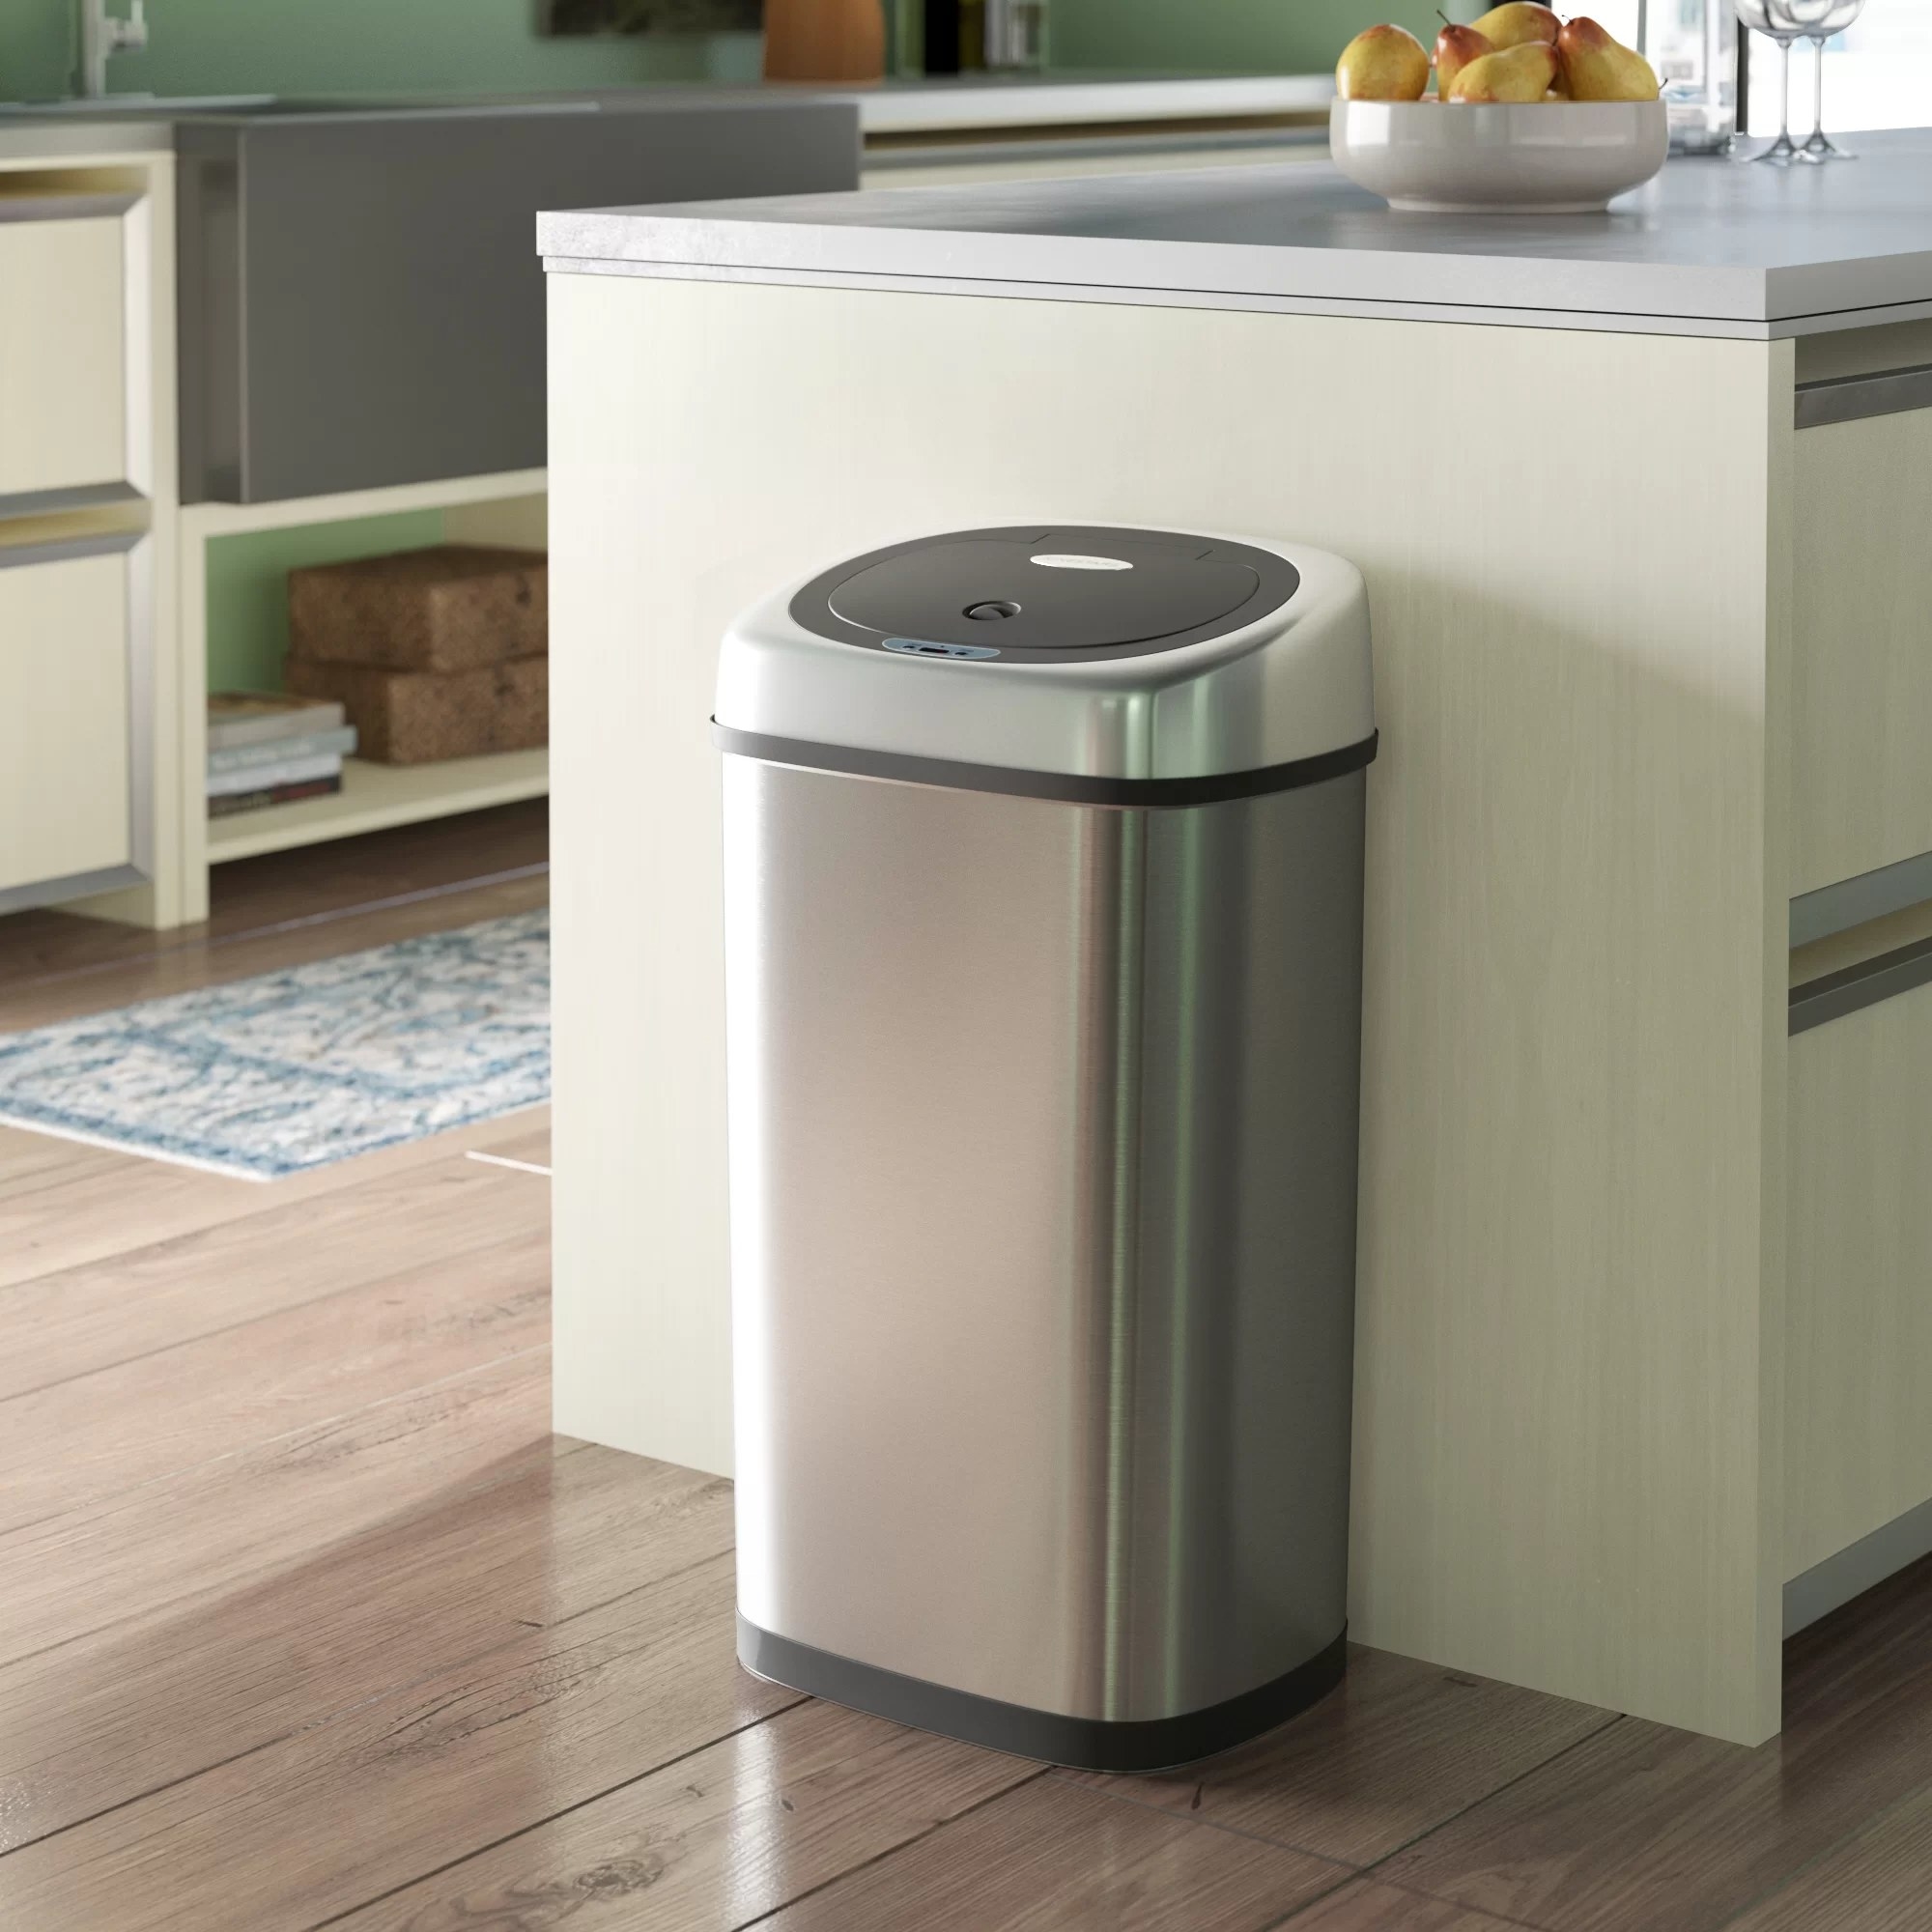 The motion-sensor trash can in a kitchen